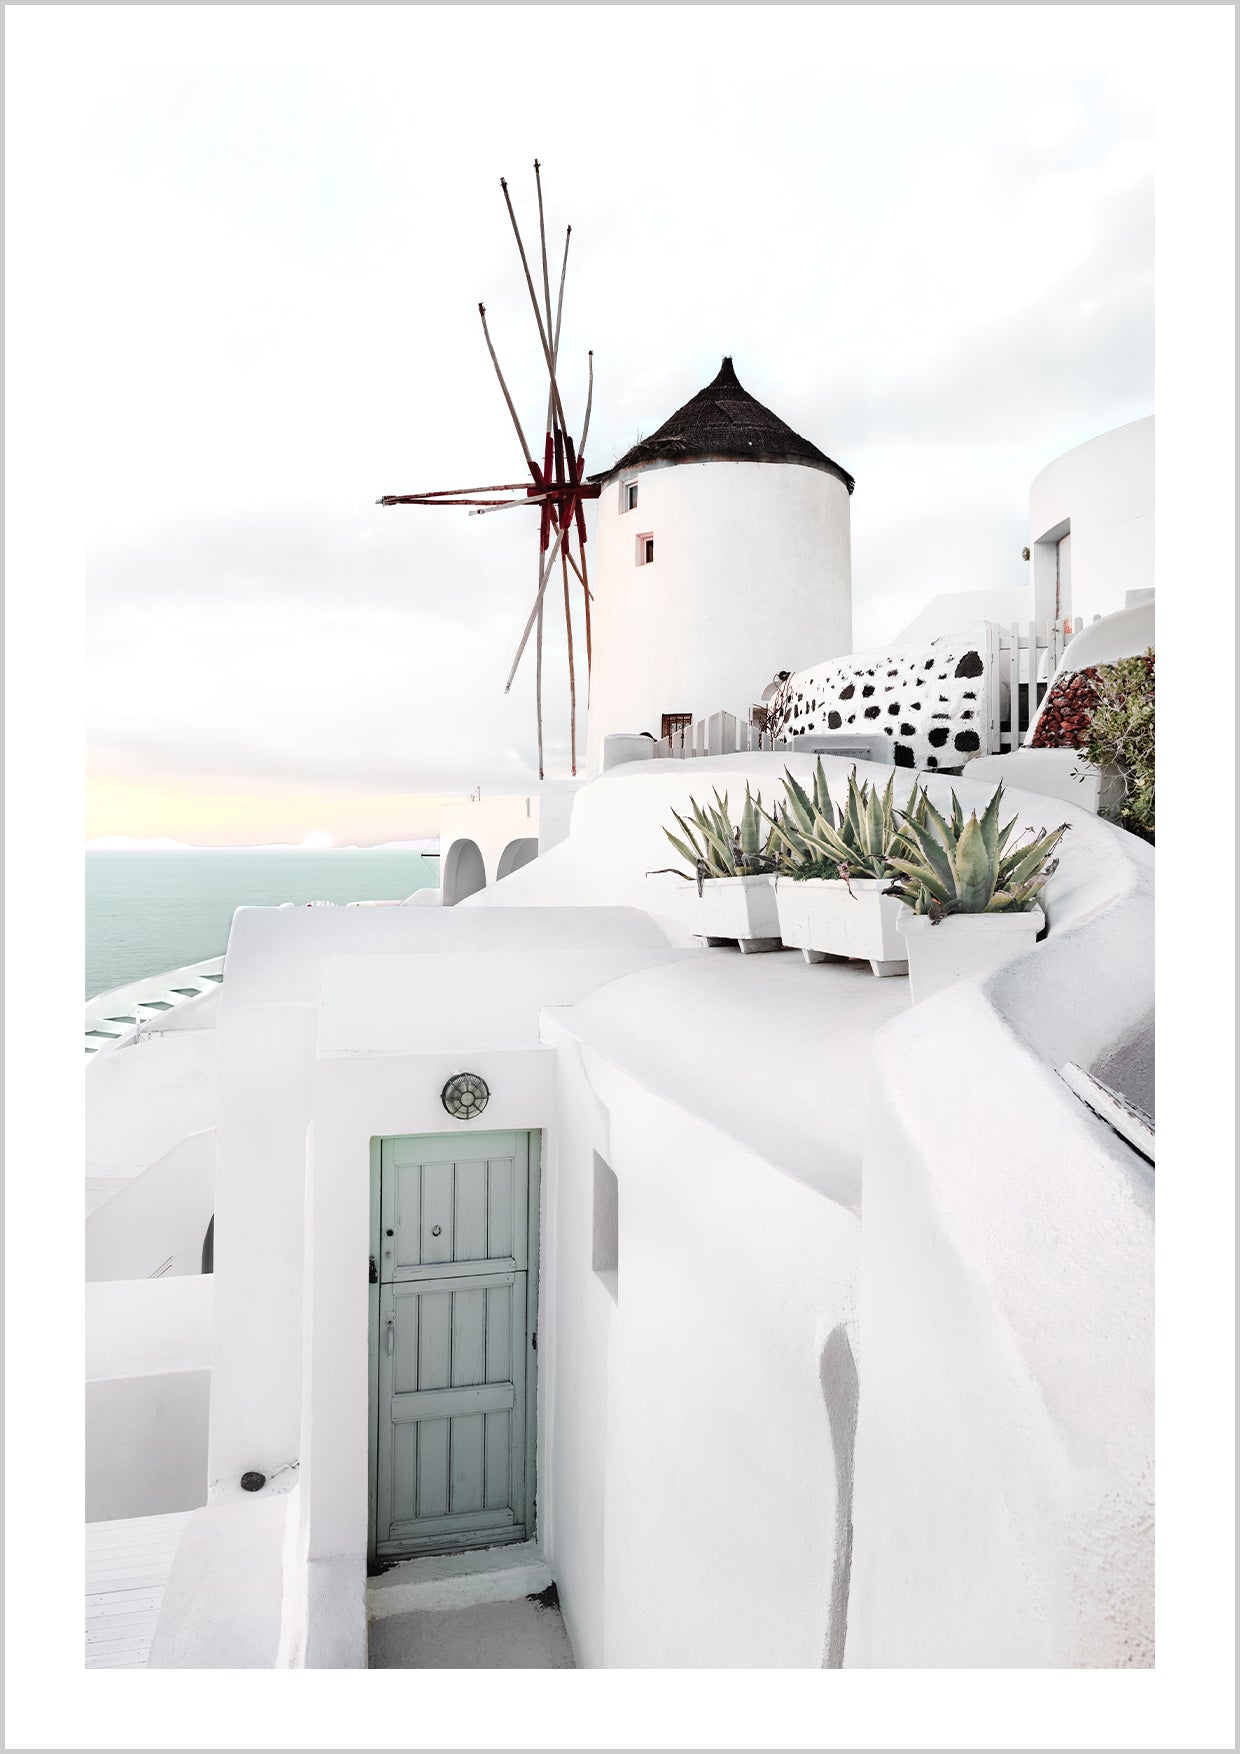 the village of Oia on the Greek island of Santorini. The island with its whitewashed houses, breathtaking sunsets and turquoise ocean inspires many travellers and sun-seekers every year. Narrow streets lead to the famous windmill and offer a captivating view of the sea.